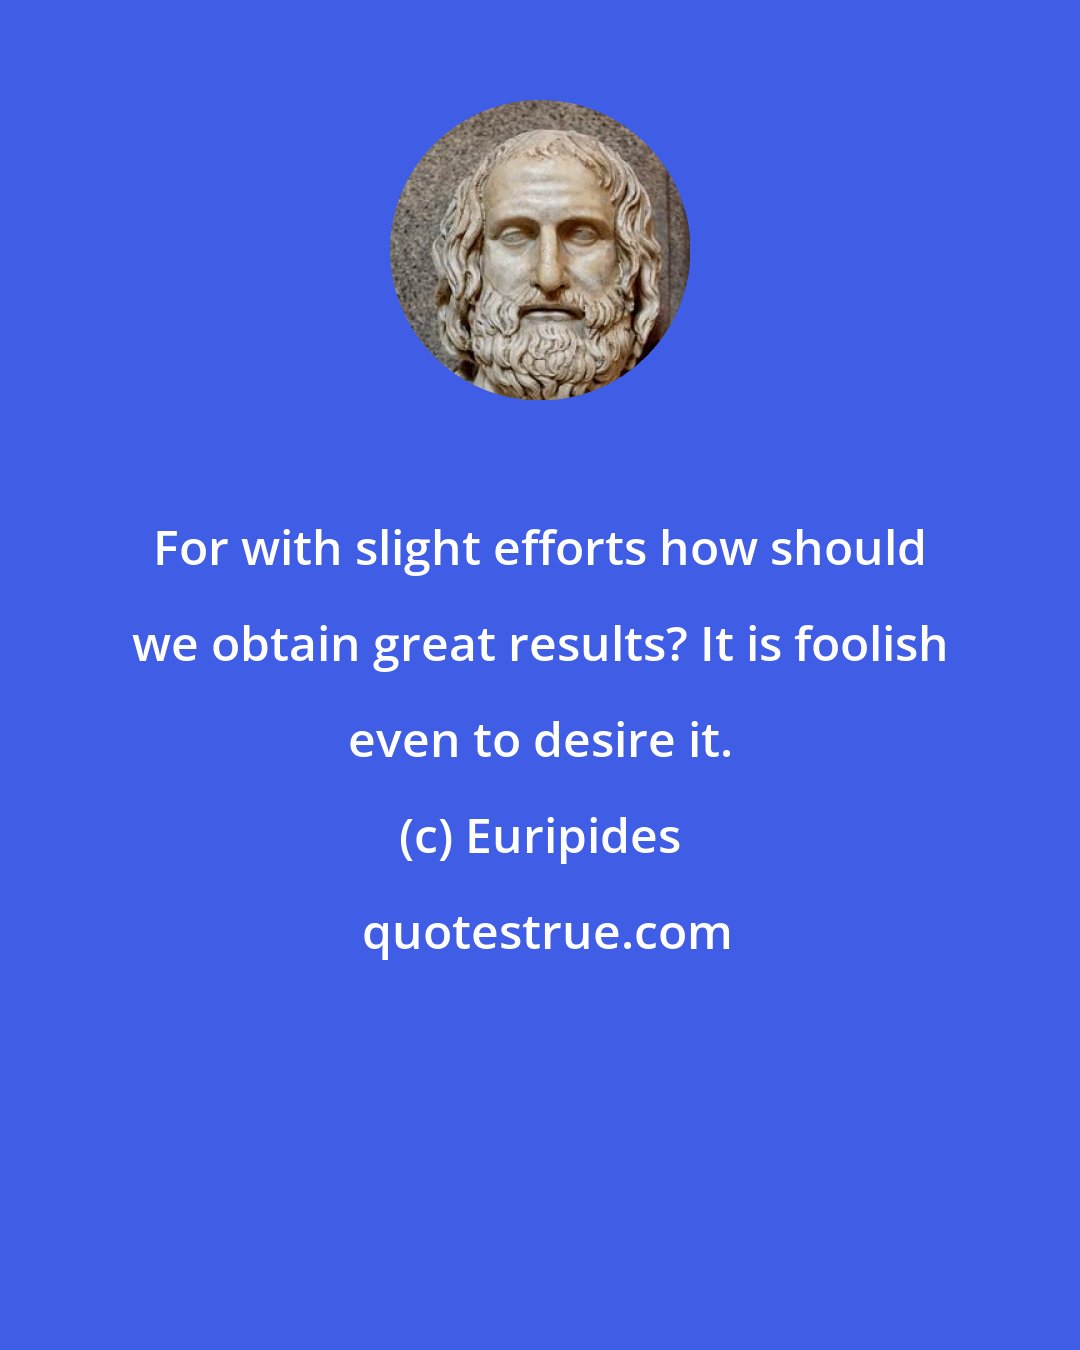 Euripides: For with slight efforts how should we obtain great results? It is foolish even to desire it.